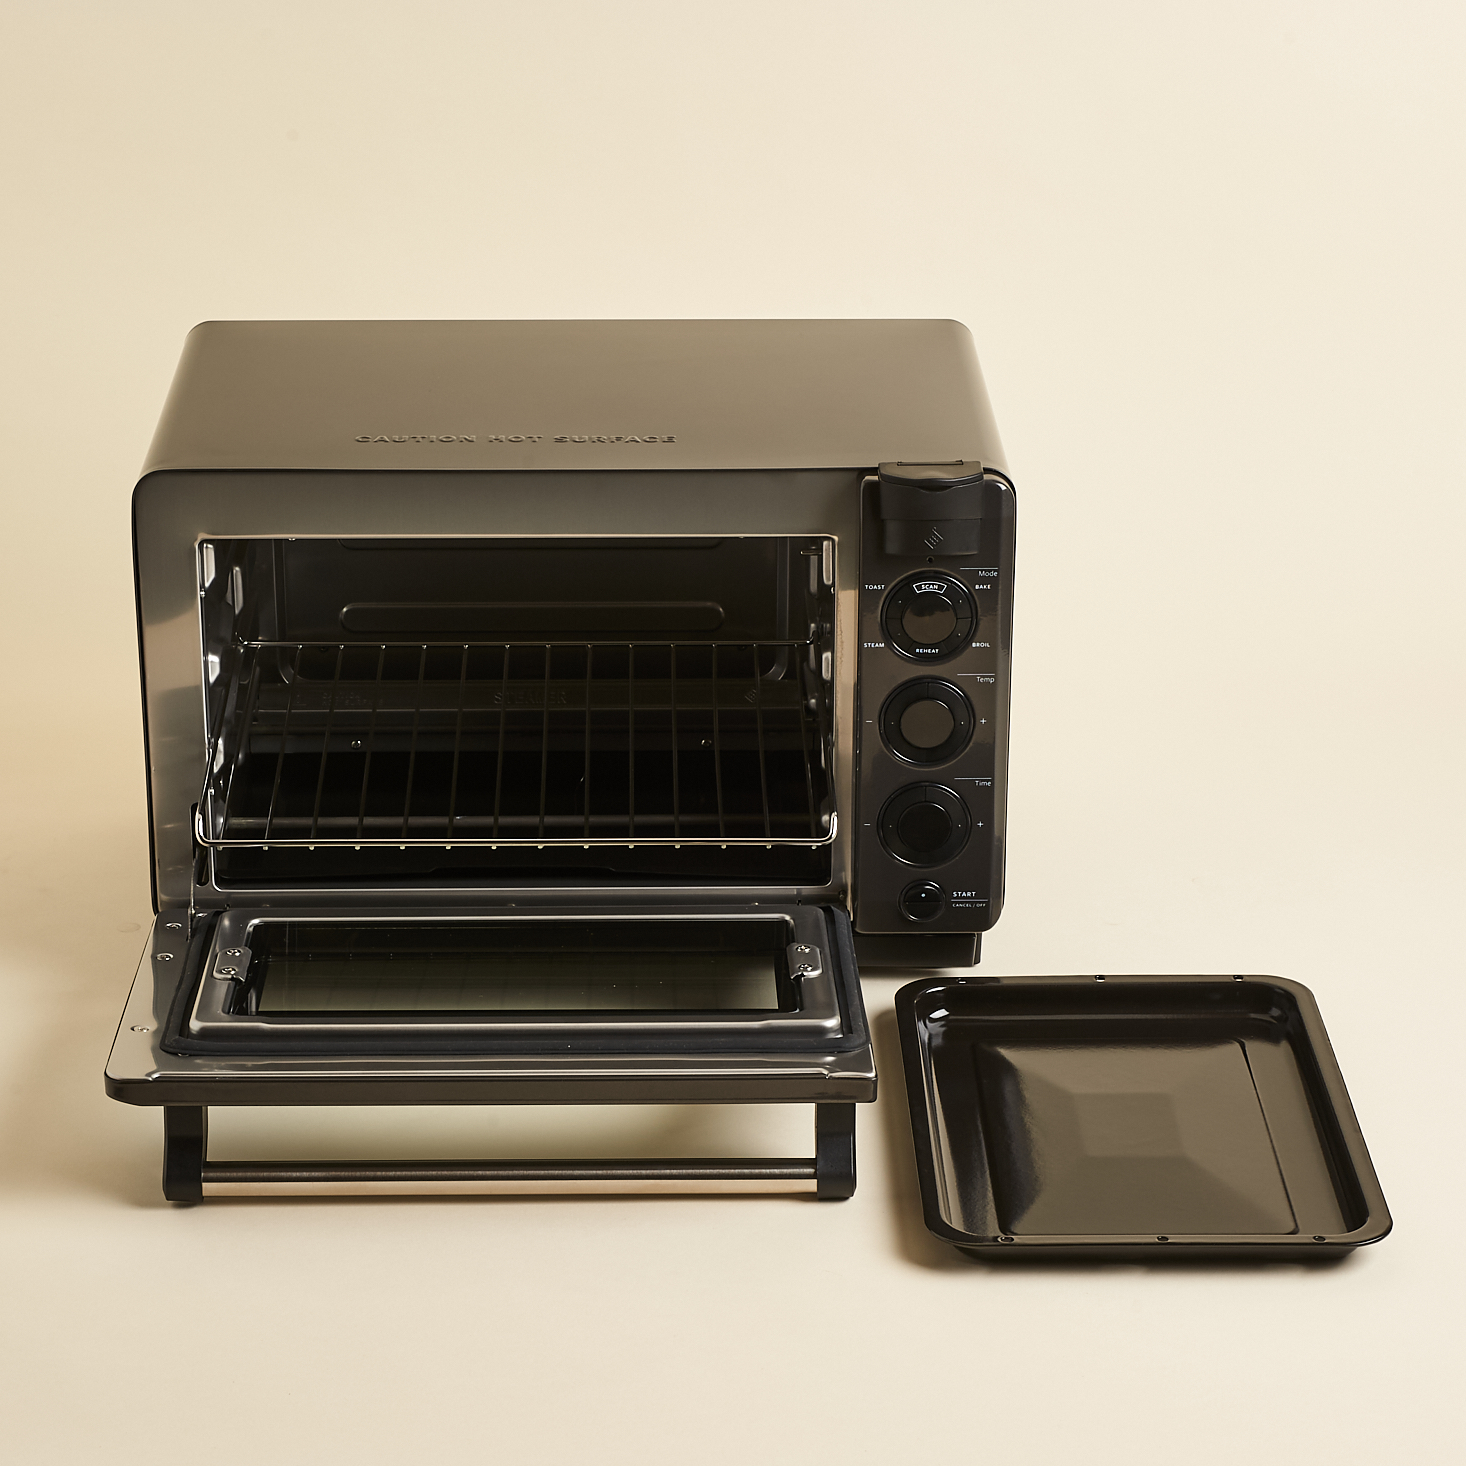 My Tovala Review — I Tested the Smart Oven and Sampled the Meals